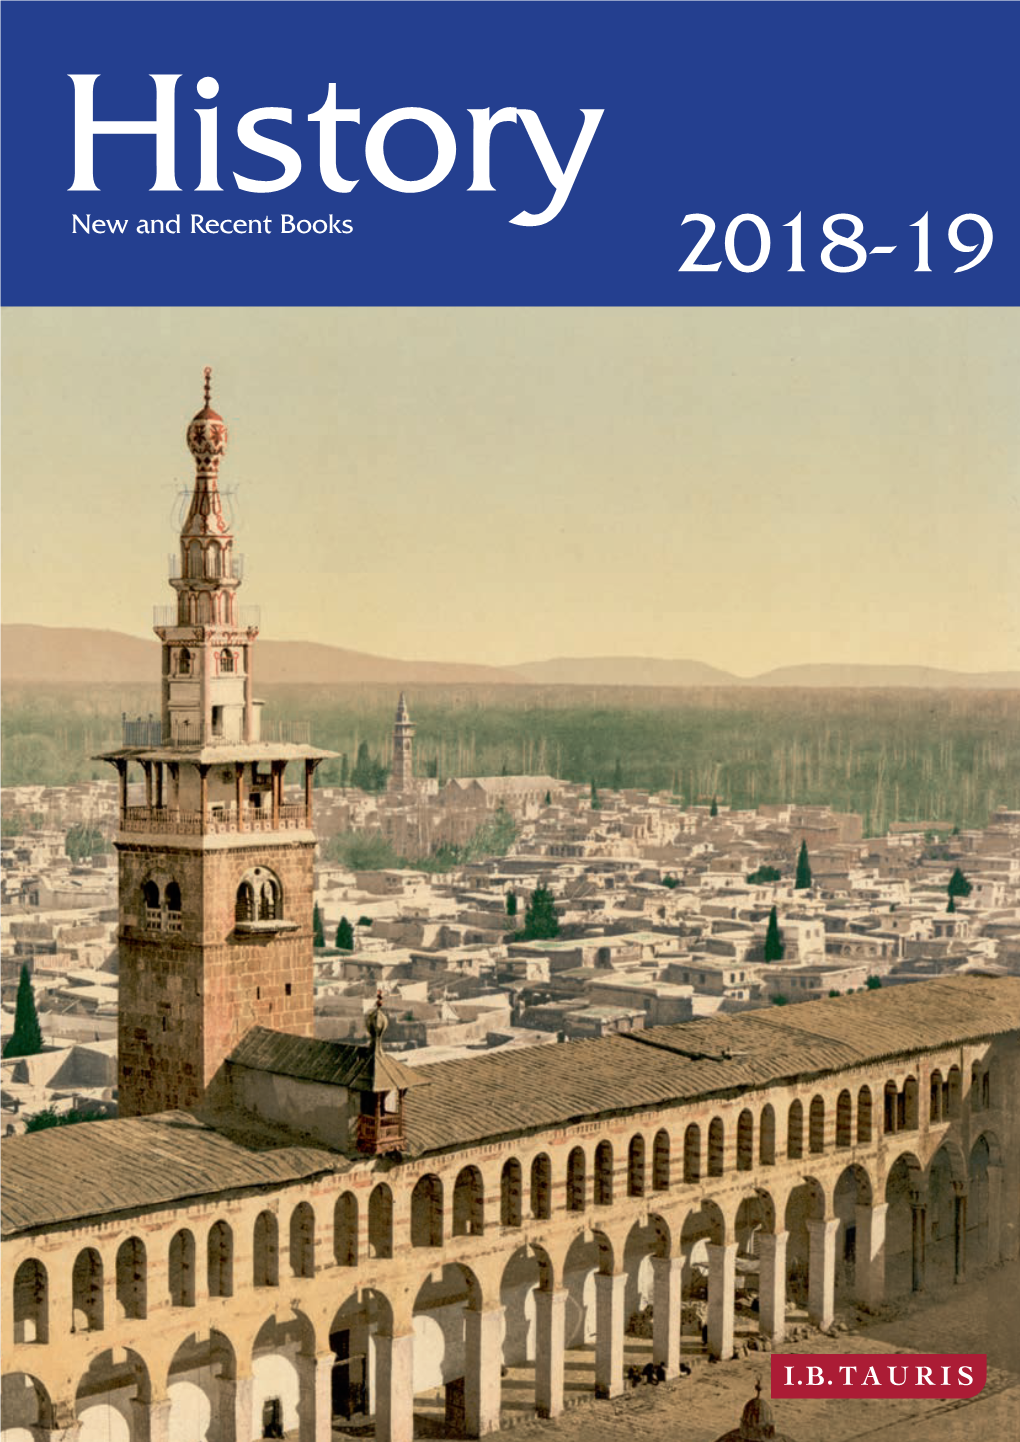 New and Recent Books 2018-19 History 2018-19 Message from the Editors: CONTENTS Welcome to the New History Catalogue